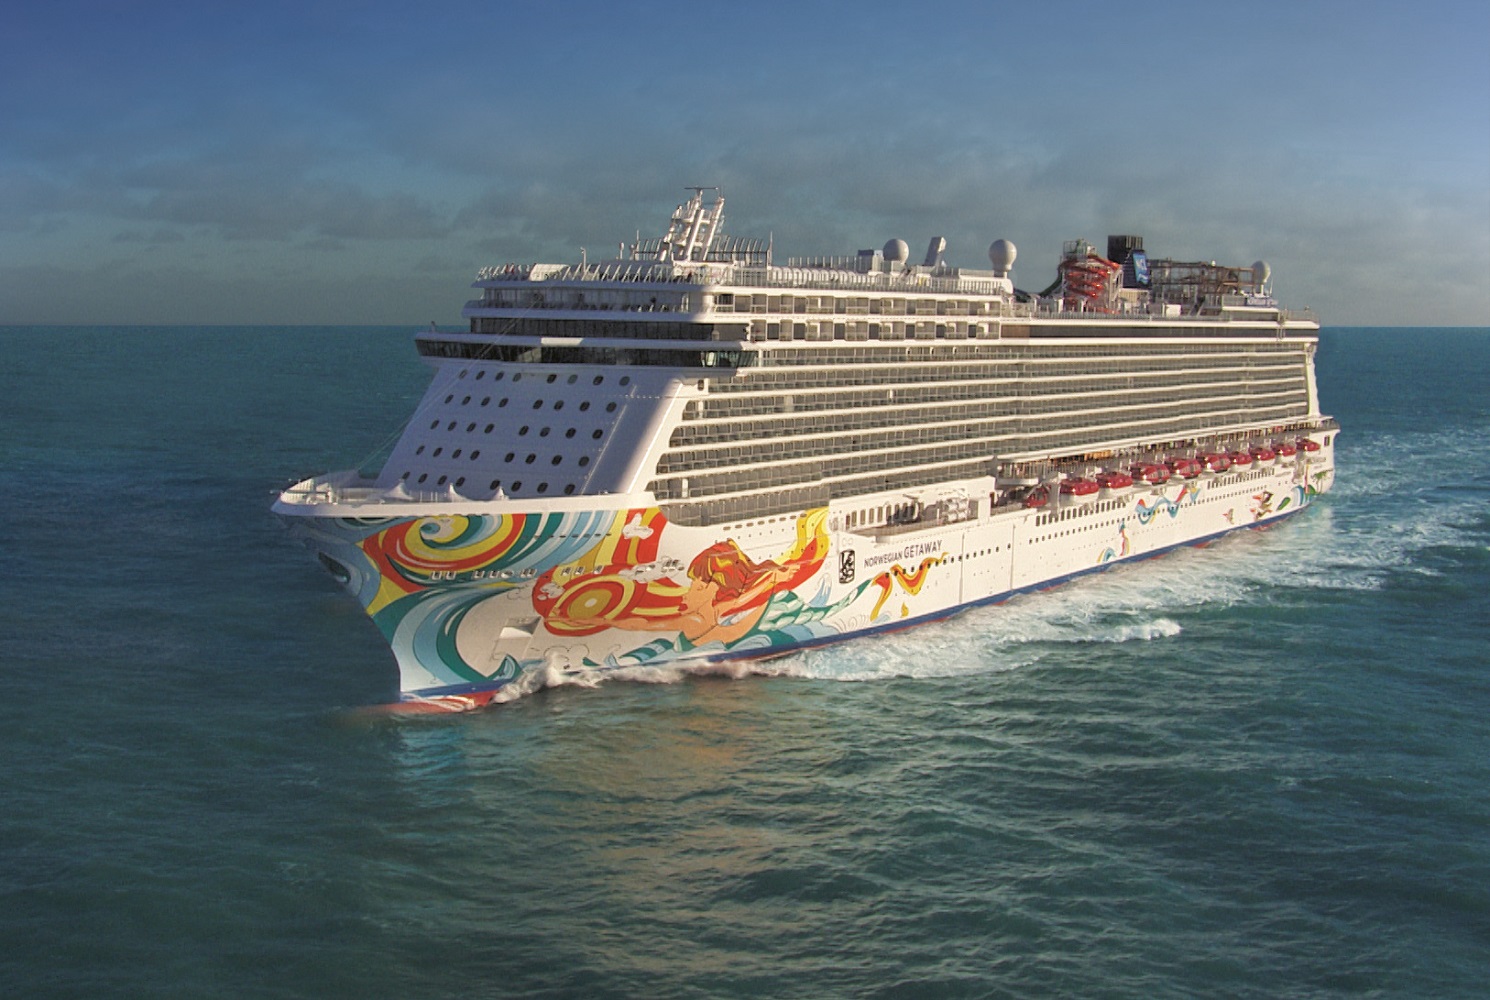 10-day Cruise to Bermuda & Turks and Caicos Islands from New York, New York on Norwegian Getaway